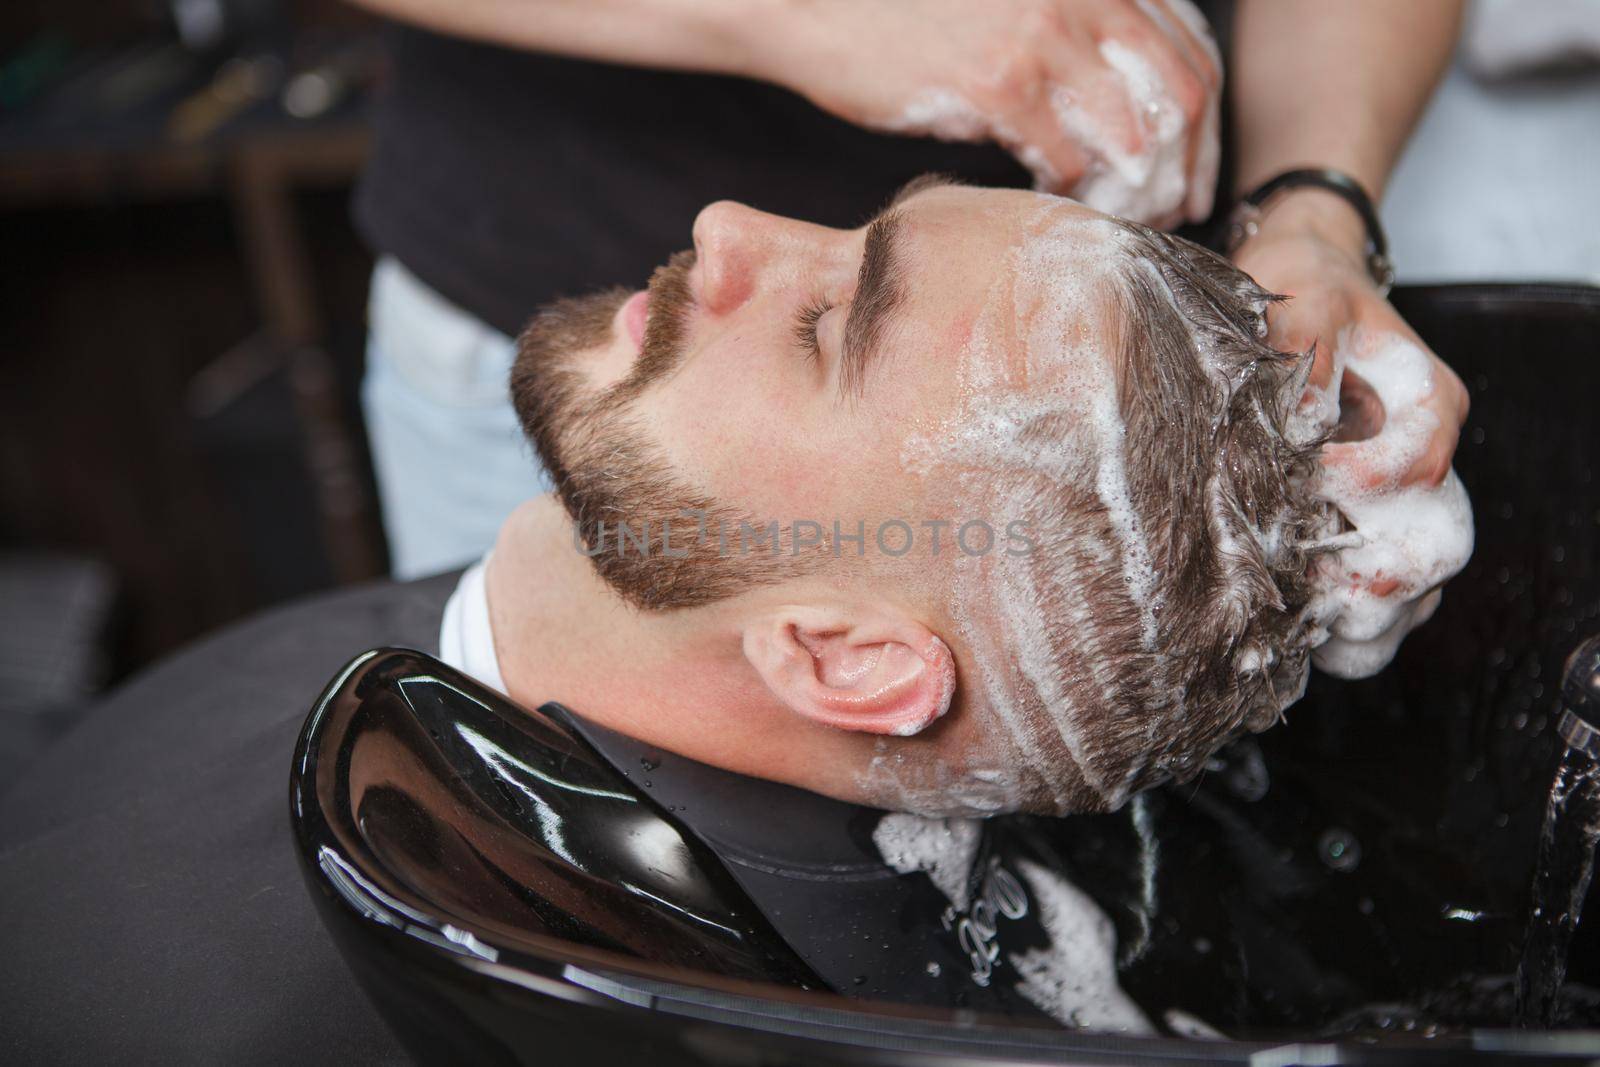 Man having his hair washed at barbershop by MAD_Production